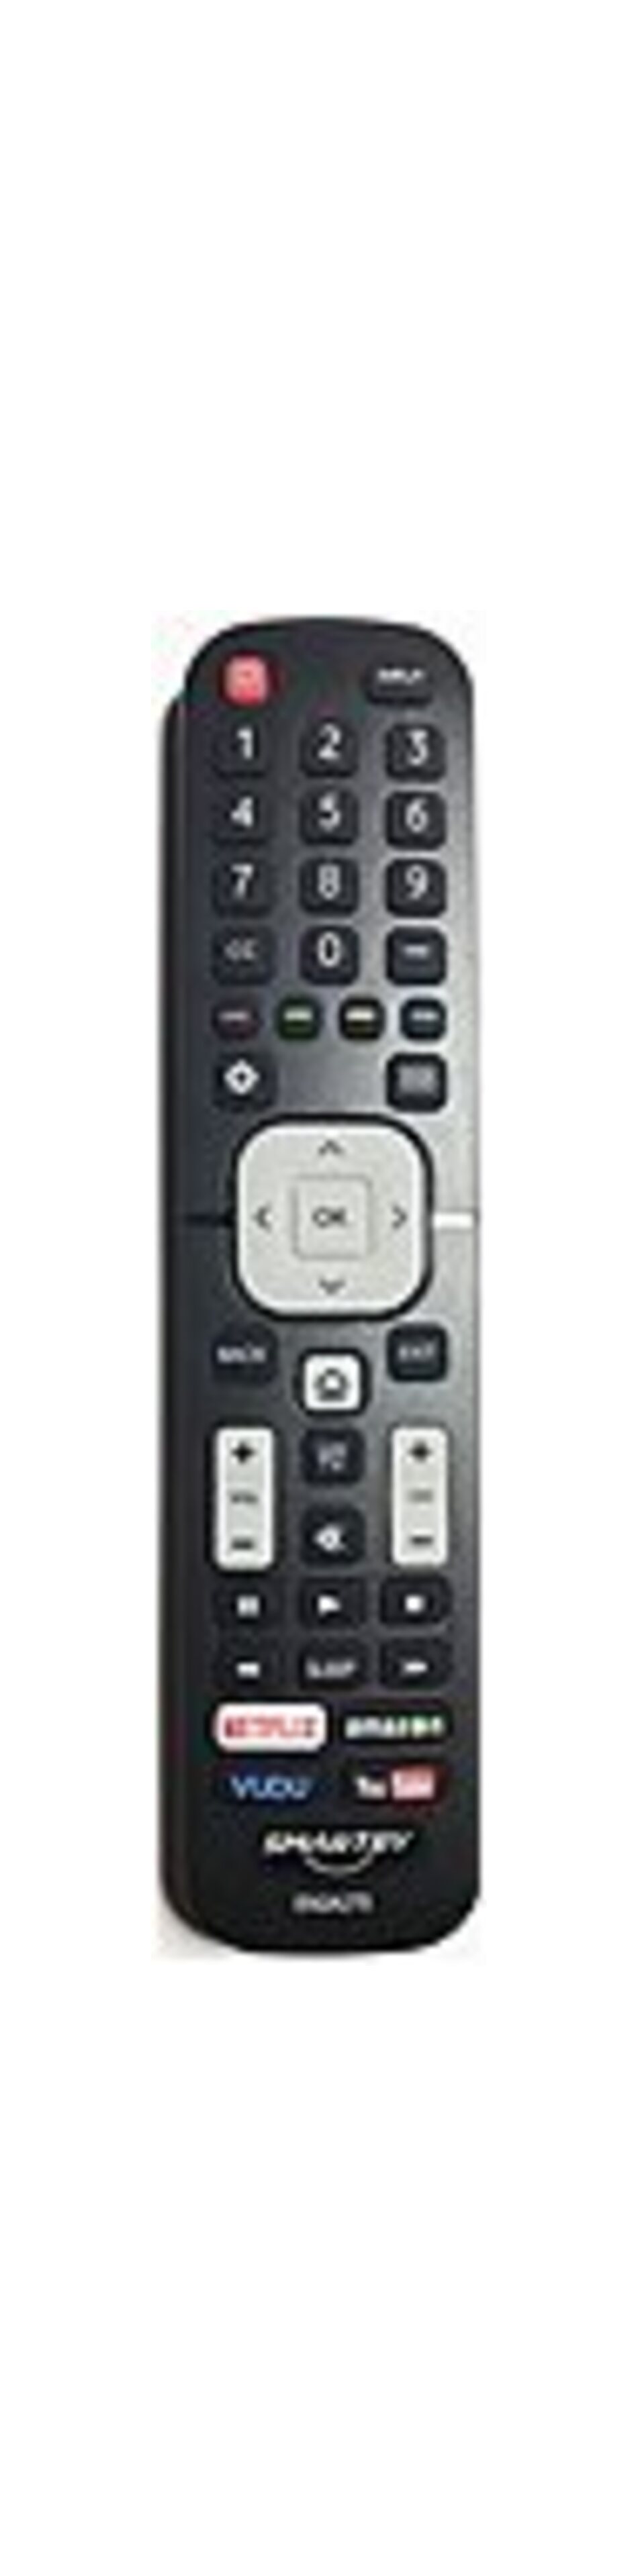 Sharp Electronics EN2A27S TV Remote Control - Black - Battery Required